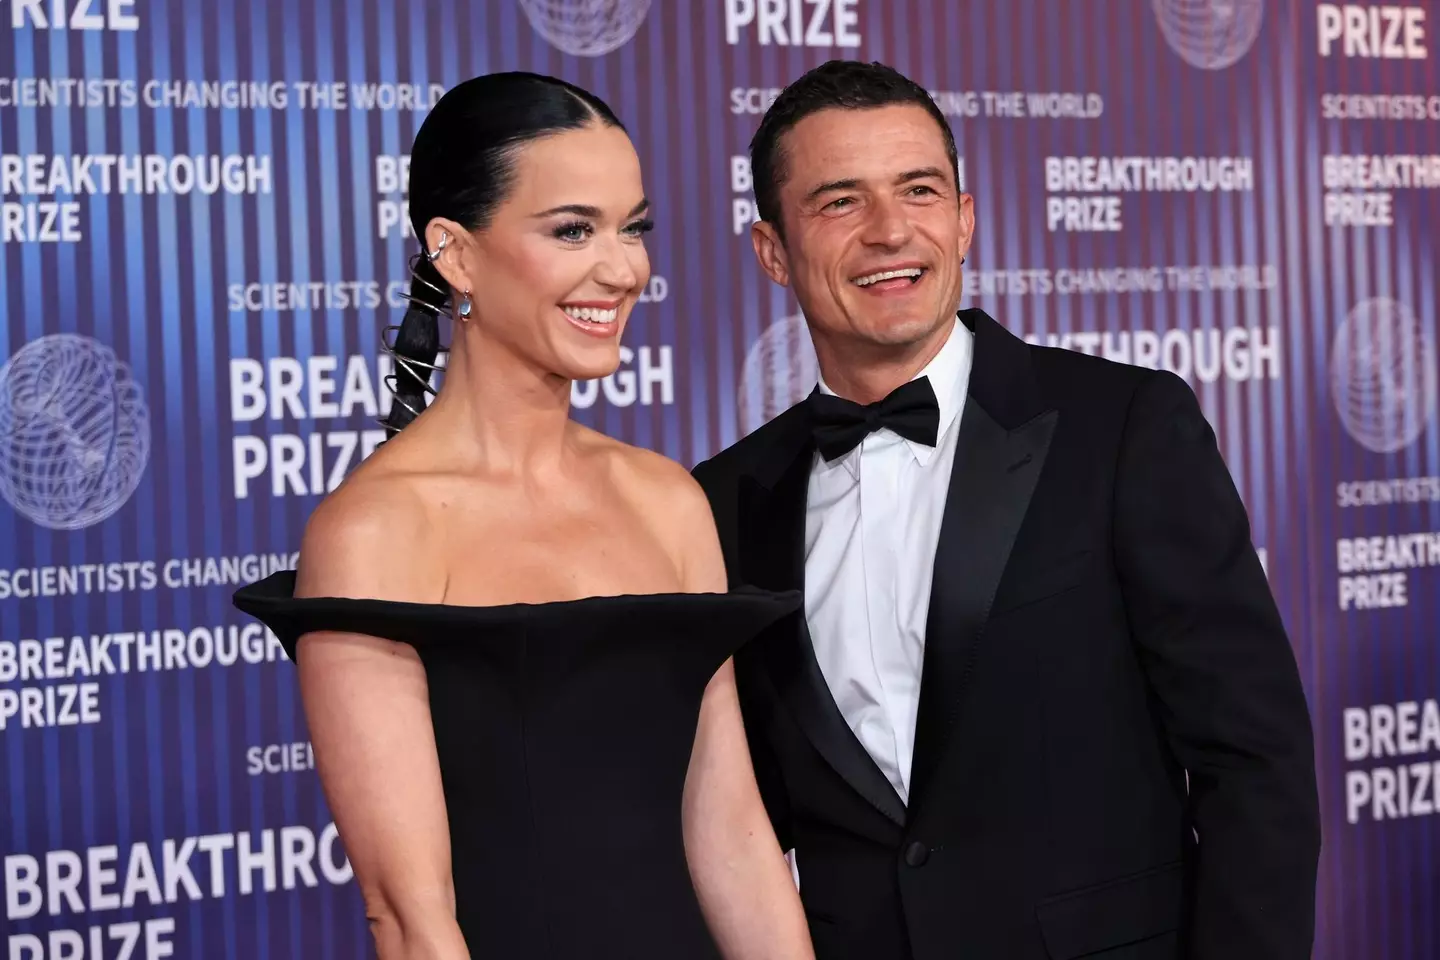 Katy Perry and Orlando Bloom together at an event. (Anna Webber/Variety via Getty Images)